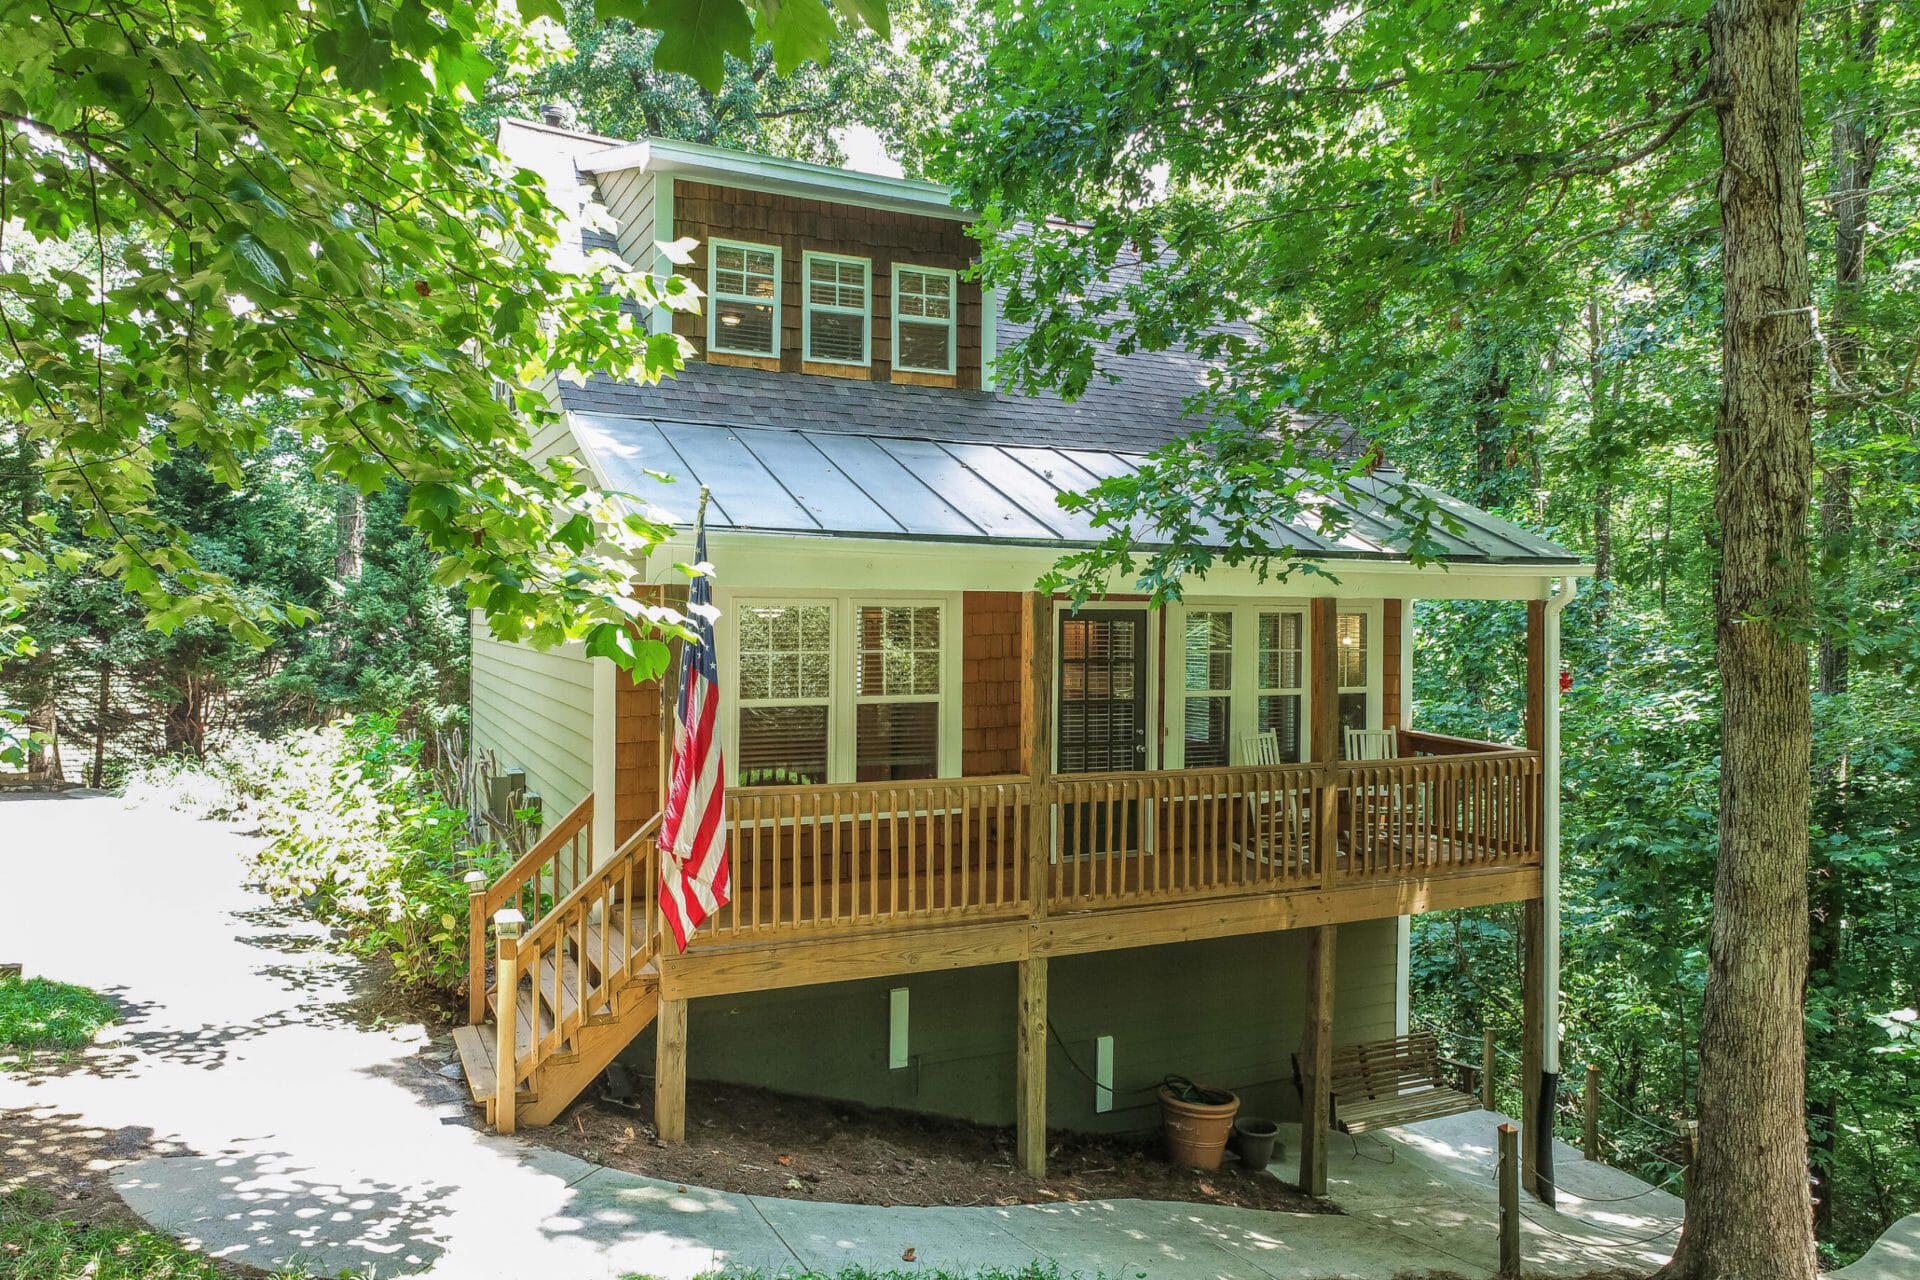 Bungalow style home with front porch in wooded area in Lake Lanier